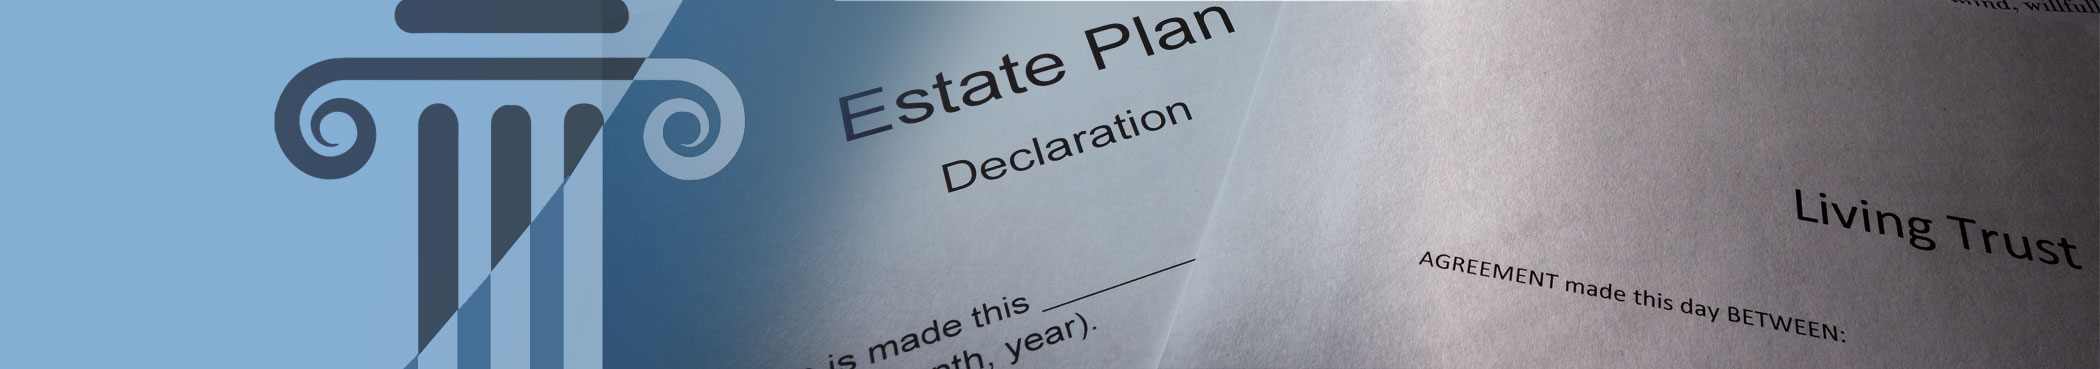 Corporate Trust and Estate Planning